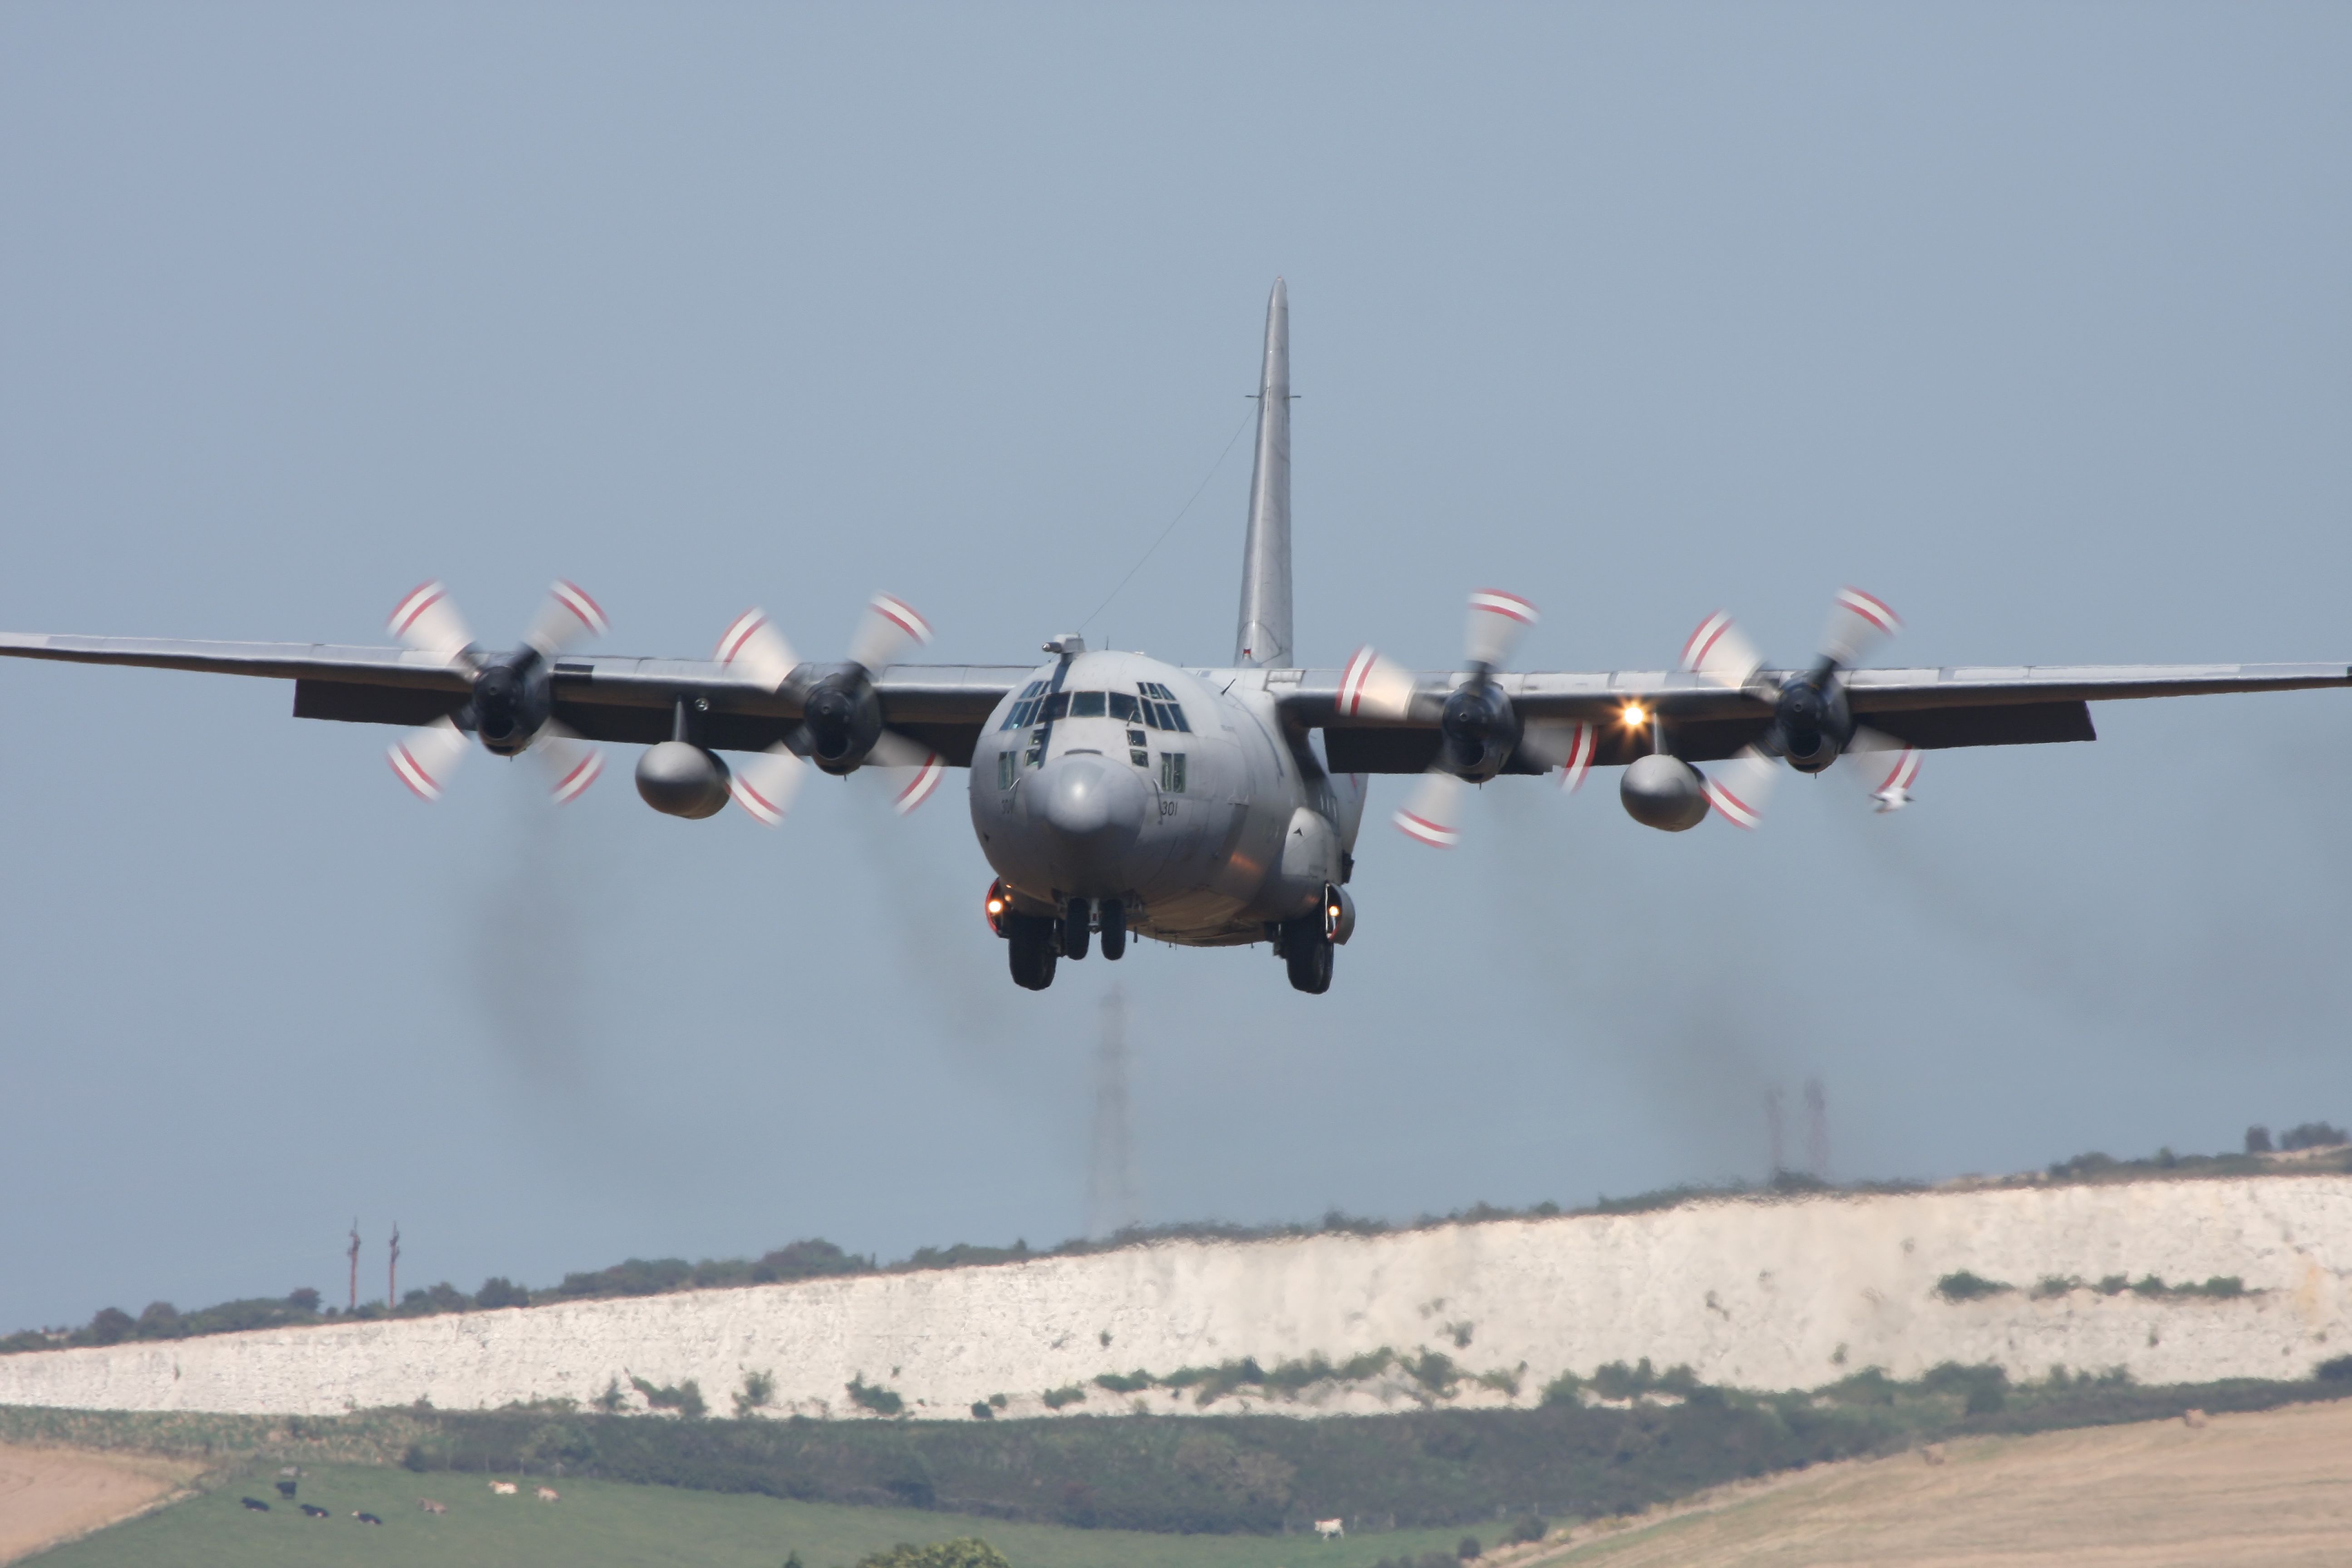 A RAF C-130 Hercules about to land.